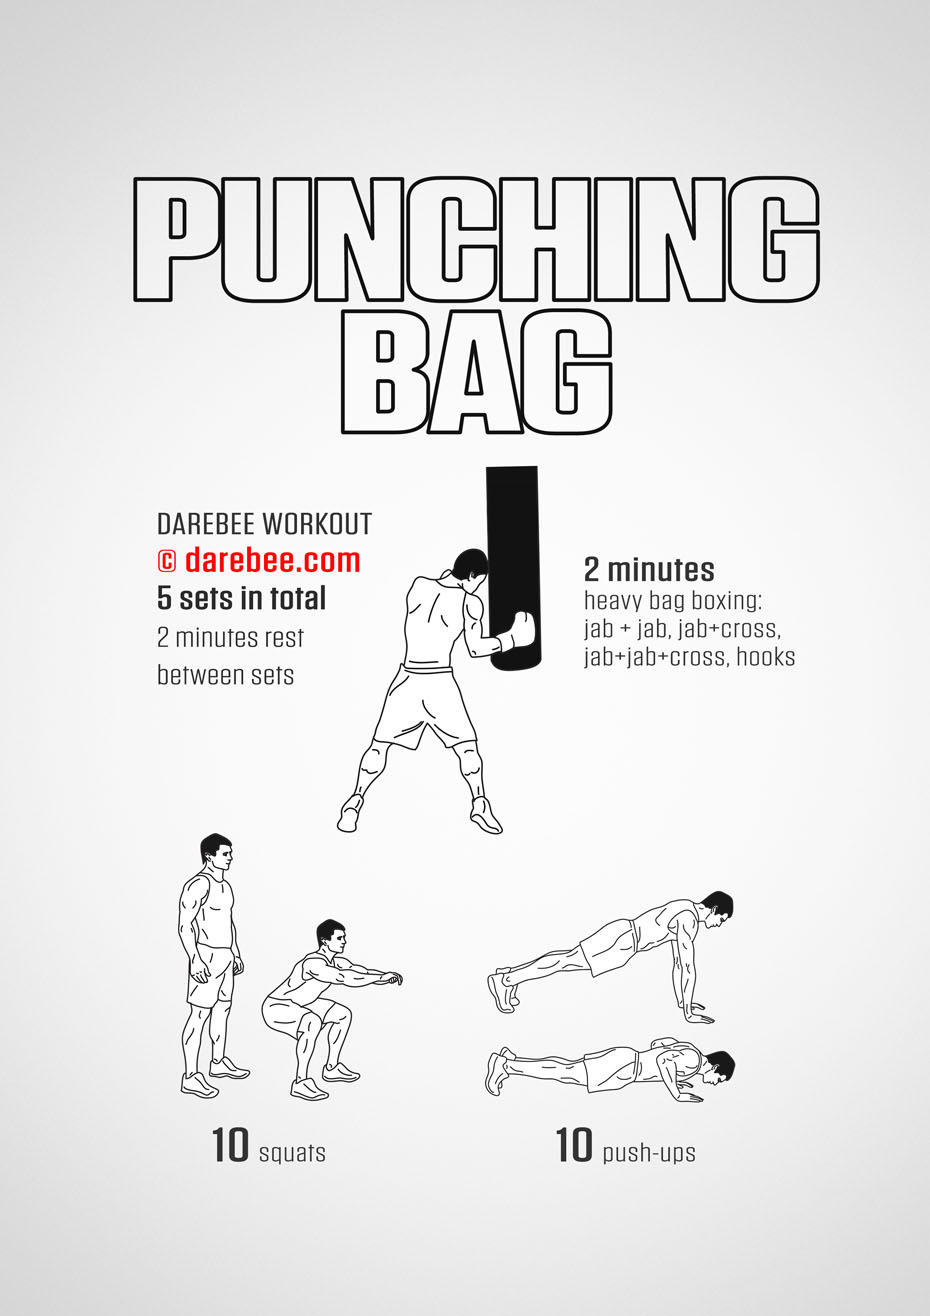 kickboxing workout with bag routine